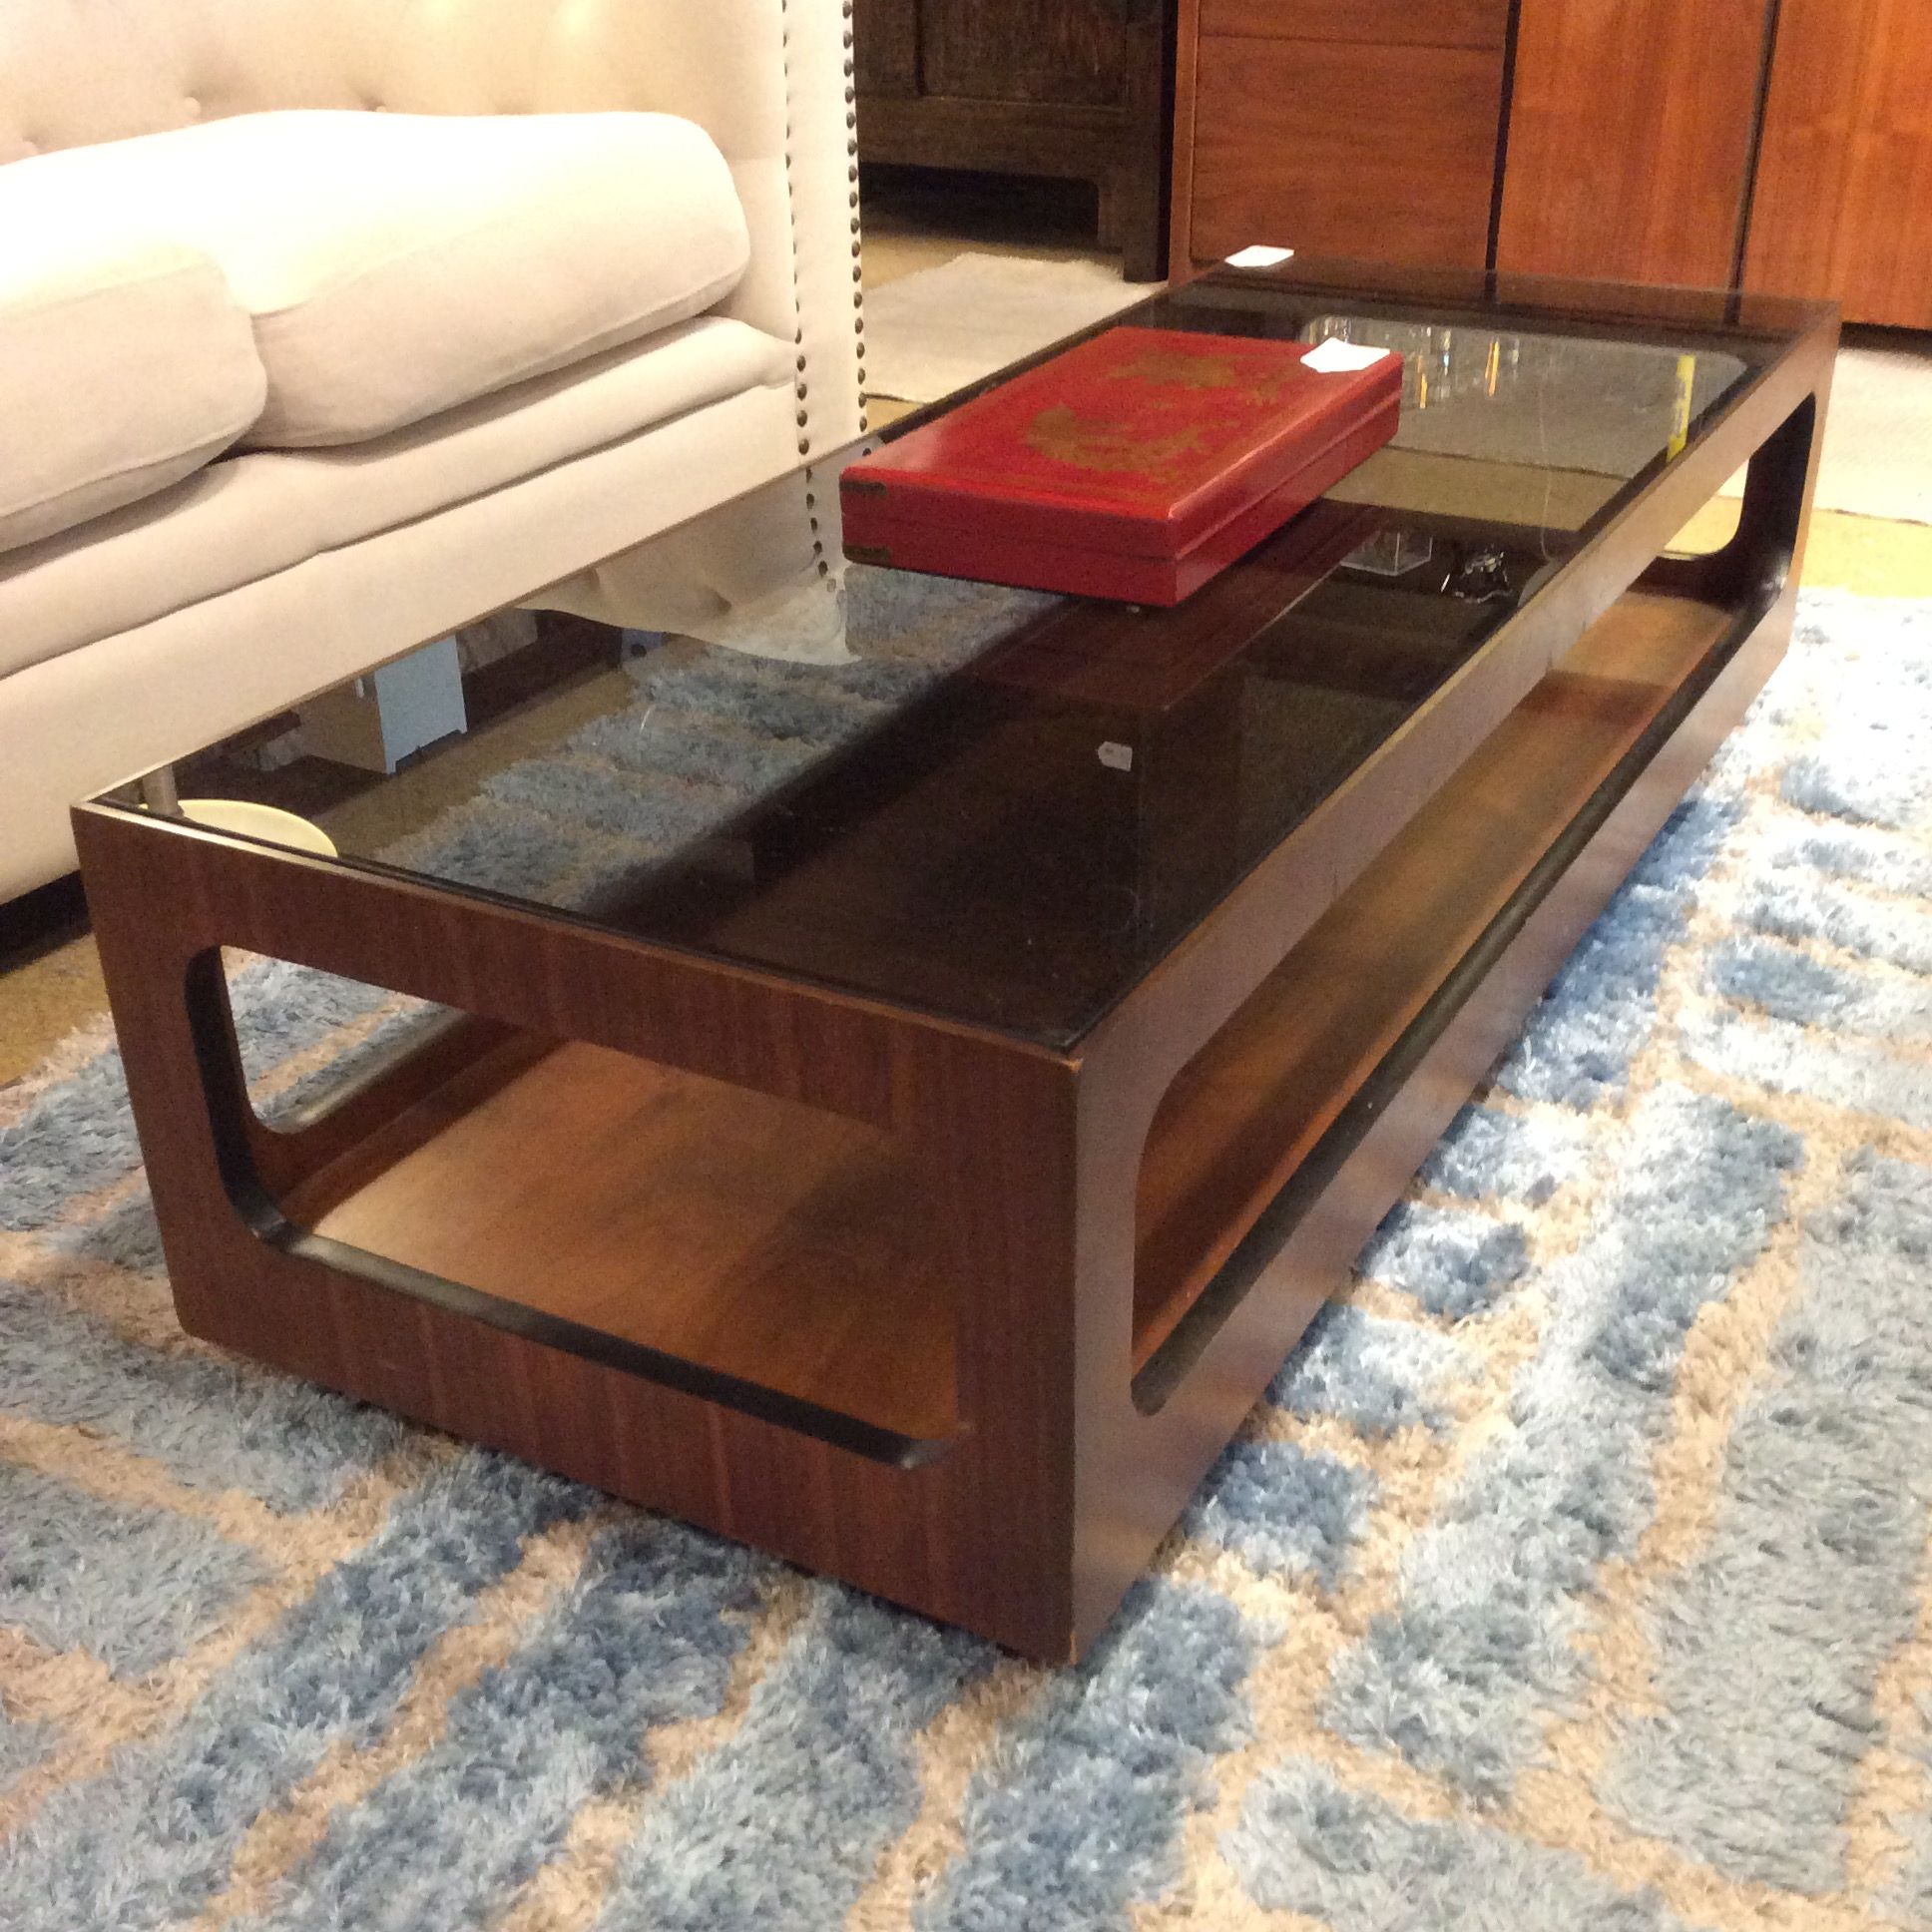 Widely Used Smoke Glass Rectangular Coffee Table Sold – Ballard Consignment In Walnut And Gold Rectangular Coffee Tables (View 1 of 10)